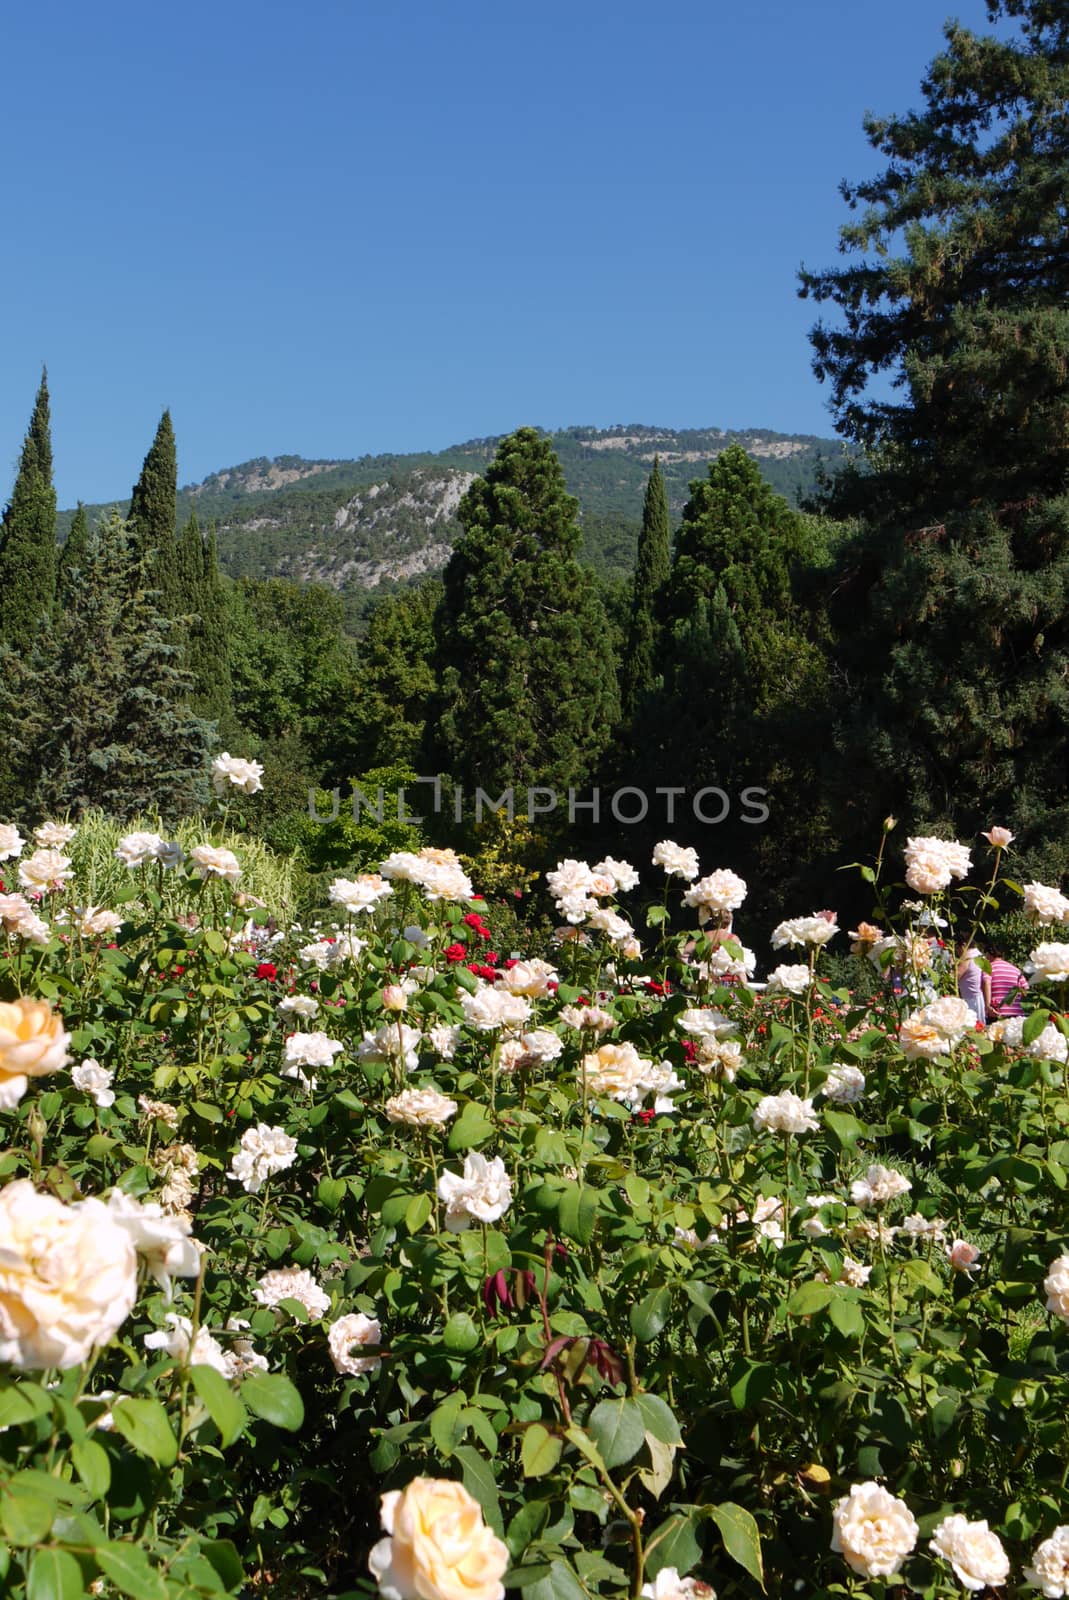 bushes of exquisite white mountains against the backdrop of mountains visible far away